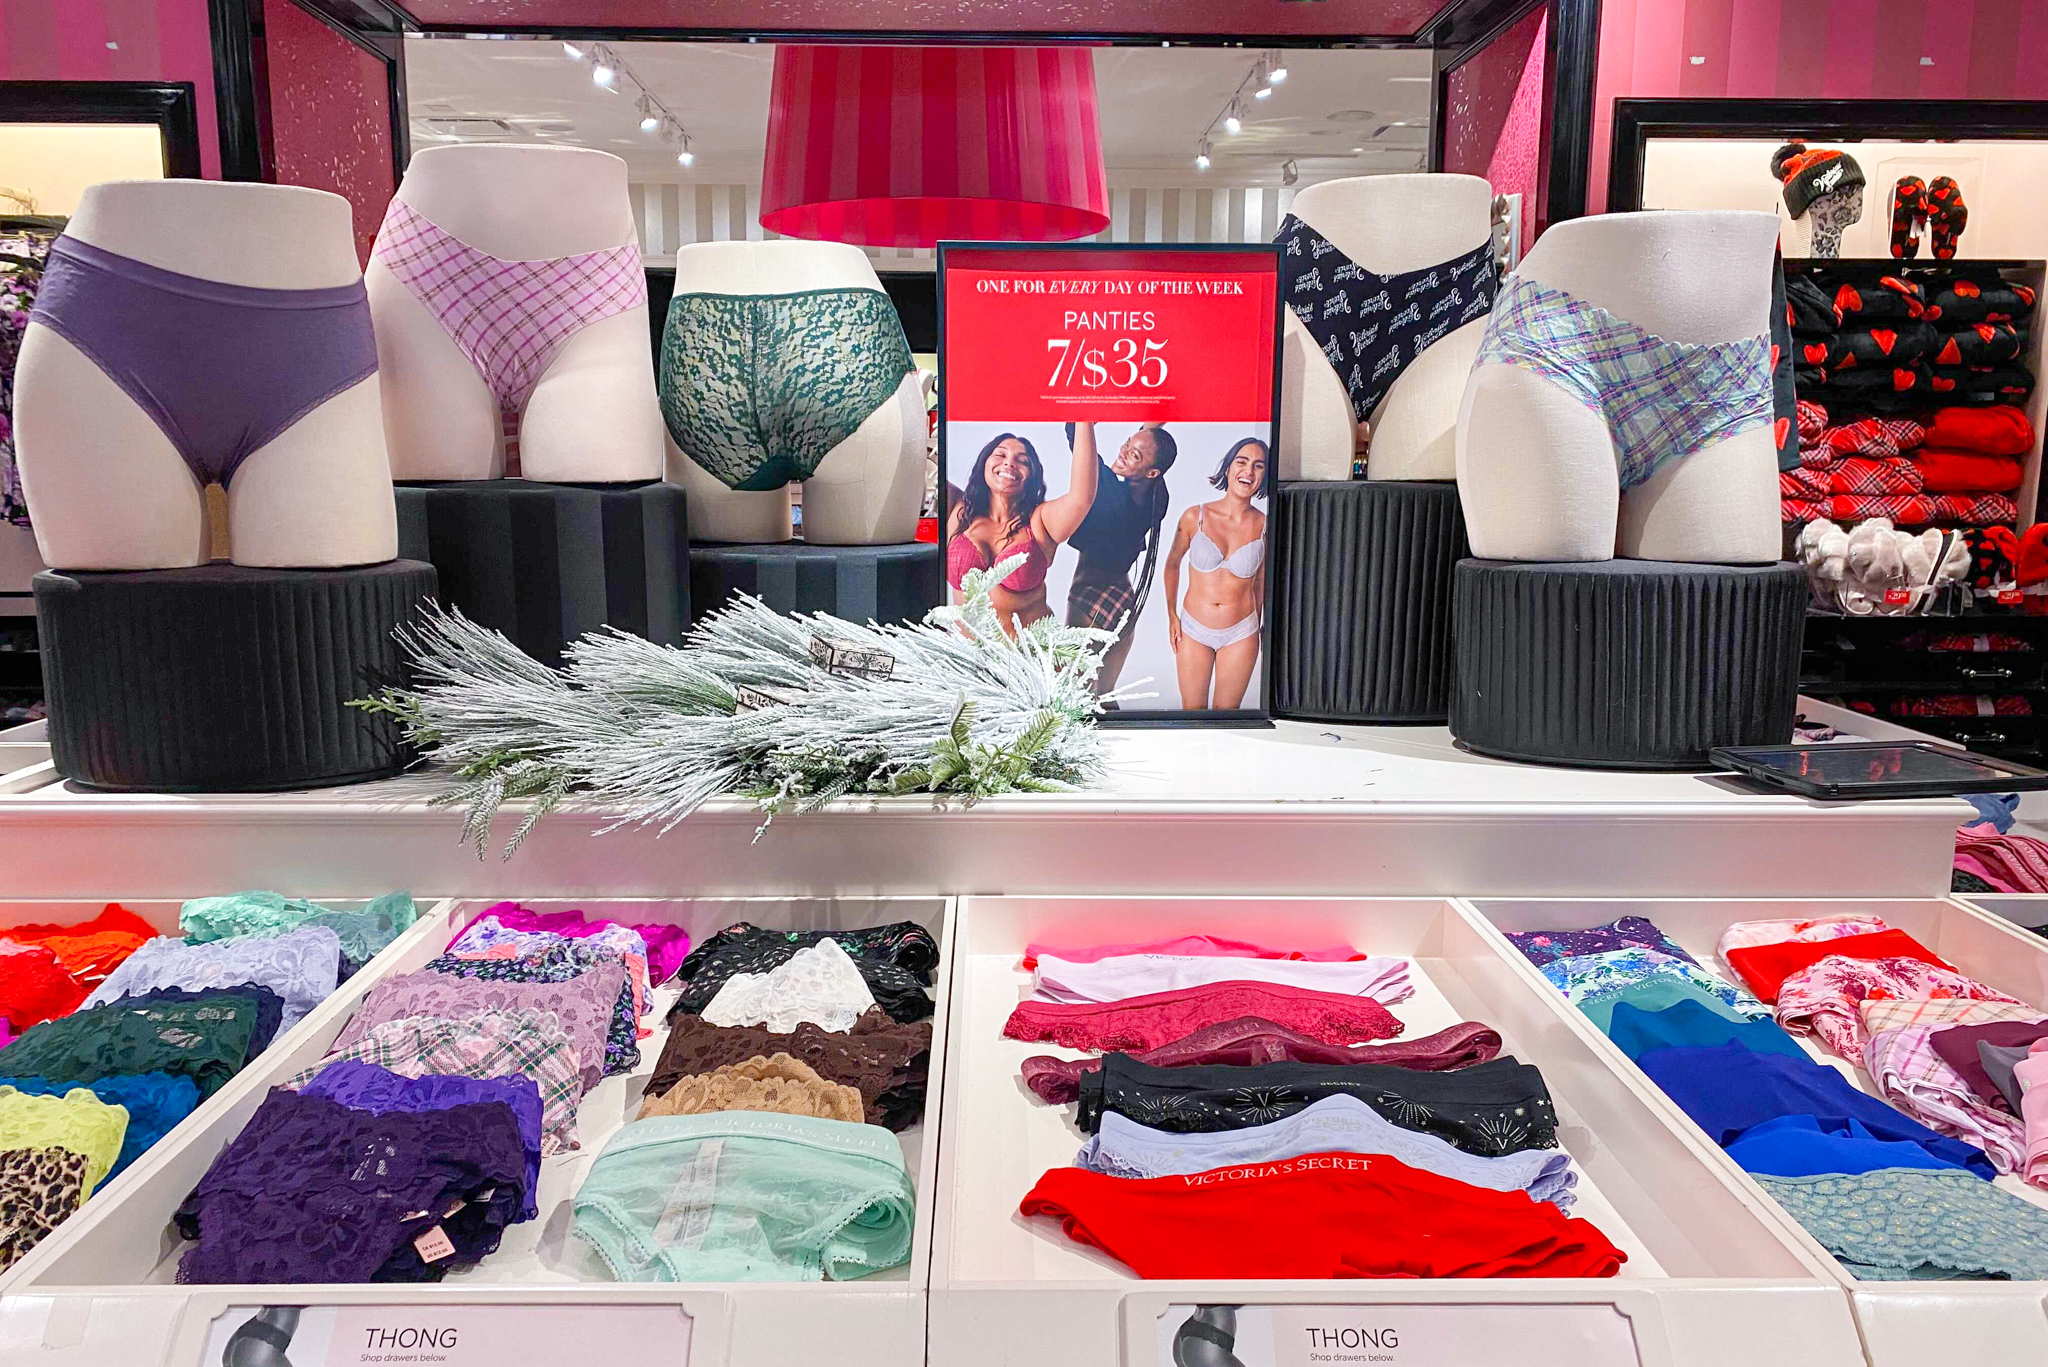 Victoria's Secret PINK - More Panties = Less Laundry! Starting tomorrow,  8/31-9/4, score 7 for $28 Panties PLUS get any PINK bra for $25 with your  7/$28 Panty purch!! Limited time only.